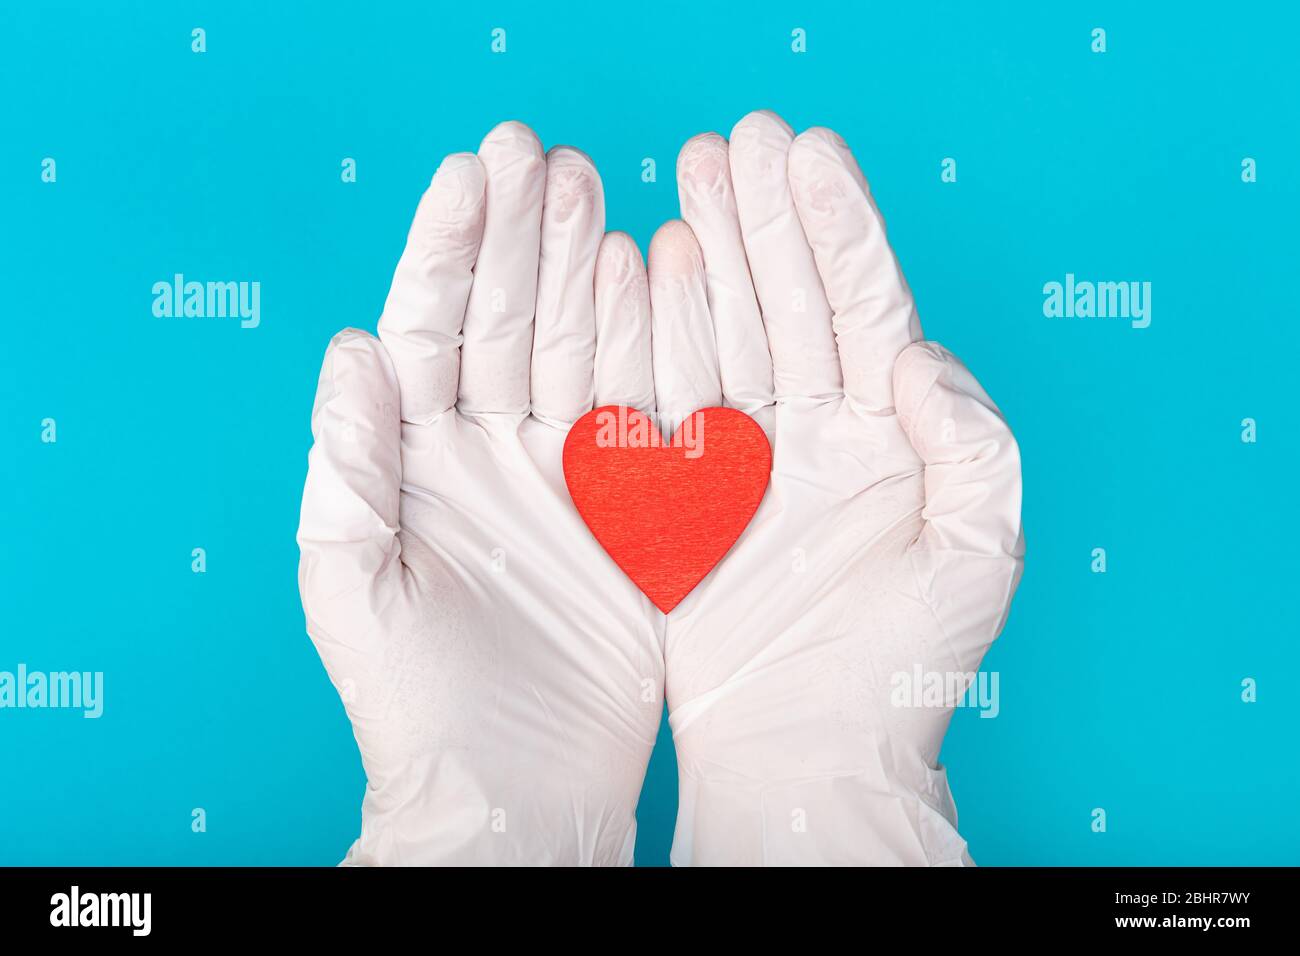 Hands in medical gloves holding a red heart shape model on blue background. Cardiology. organ donation or Healthy heart concept Stock Photo